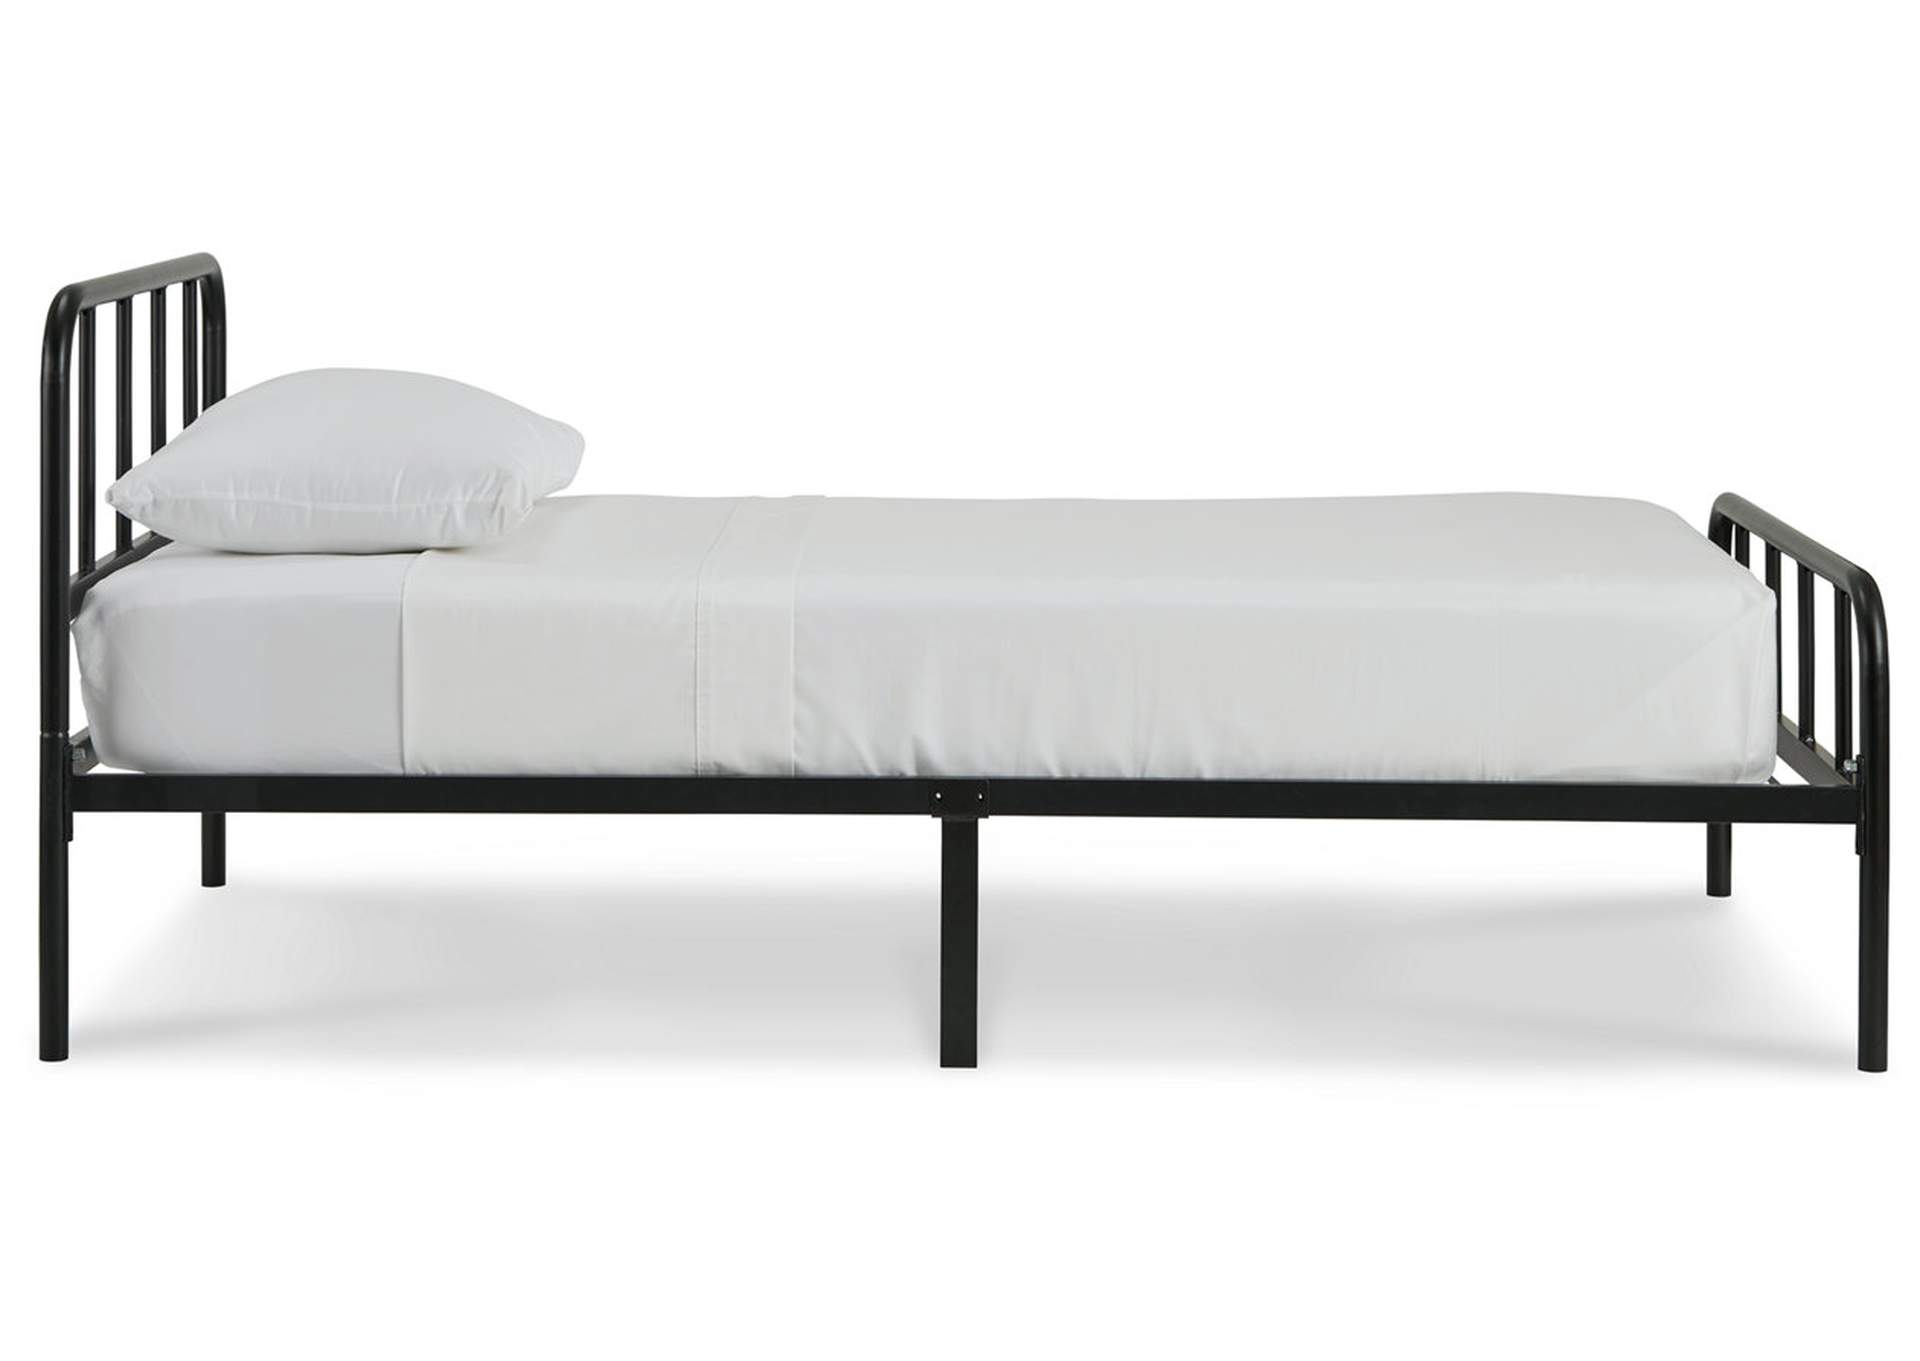 Trentlore Twin Platform Bed,Signature Design By Ashley